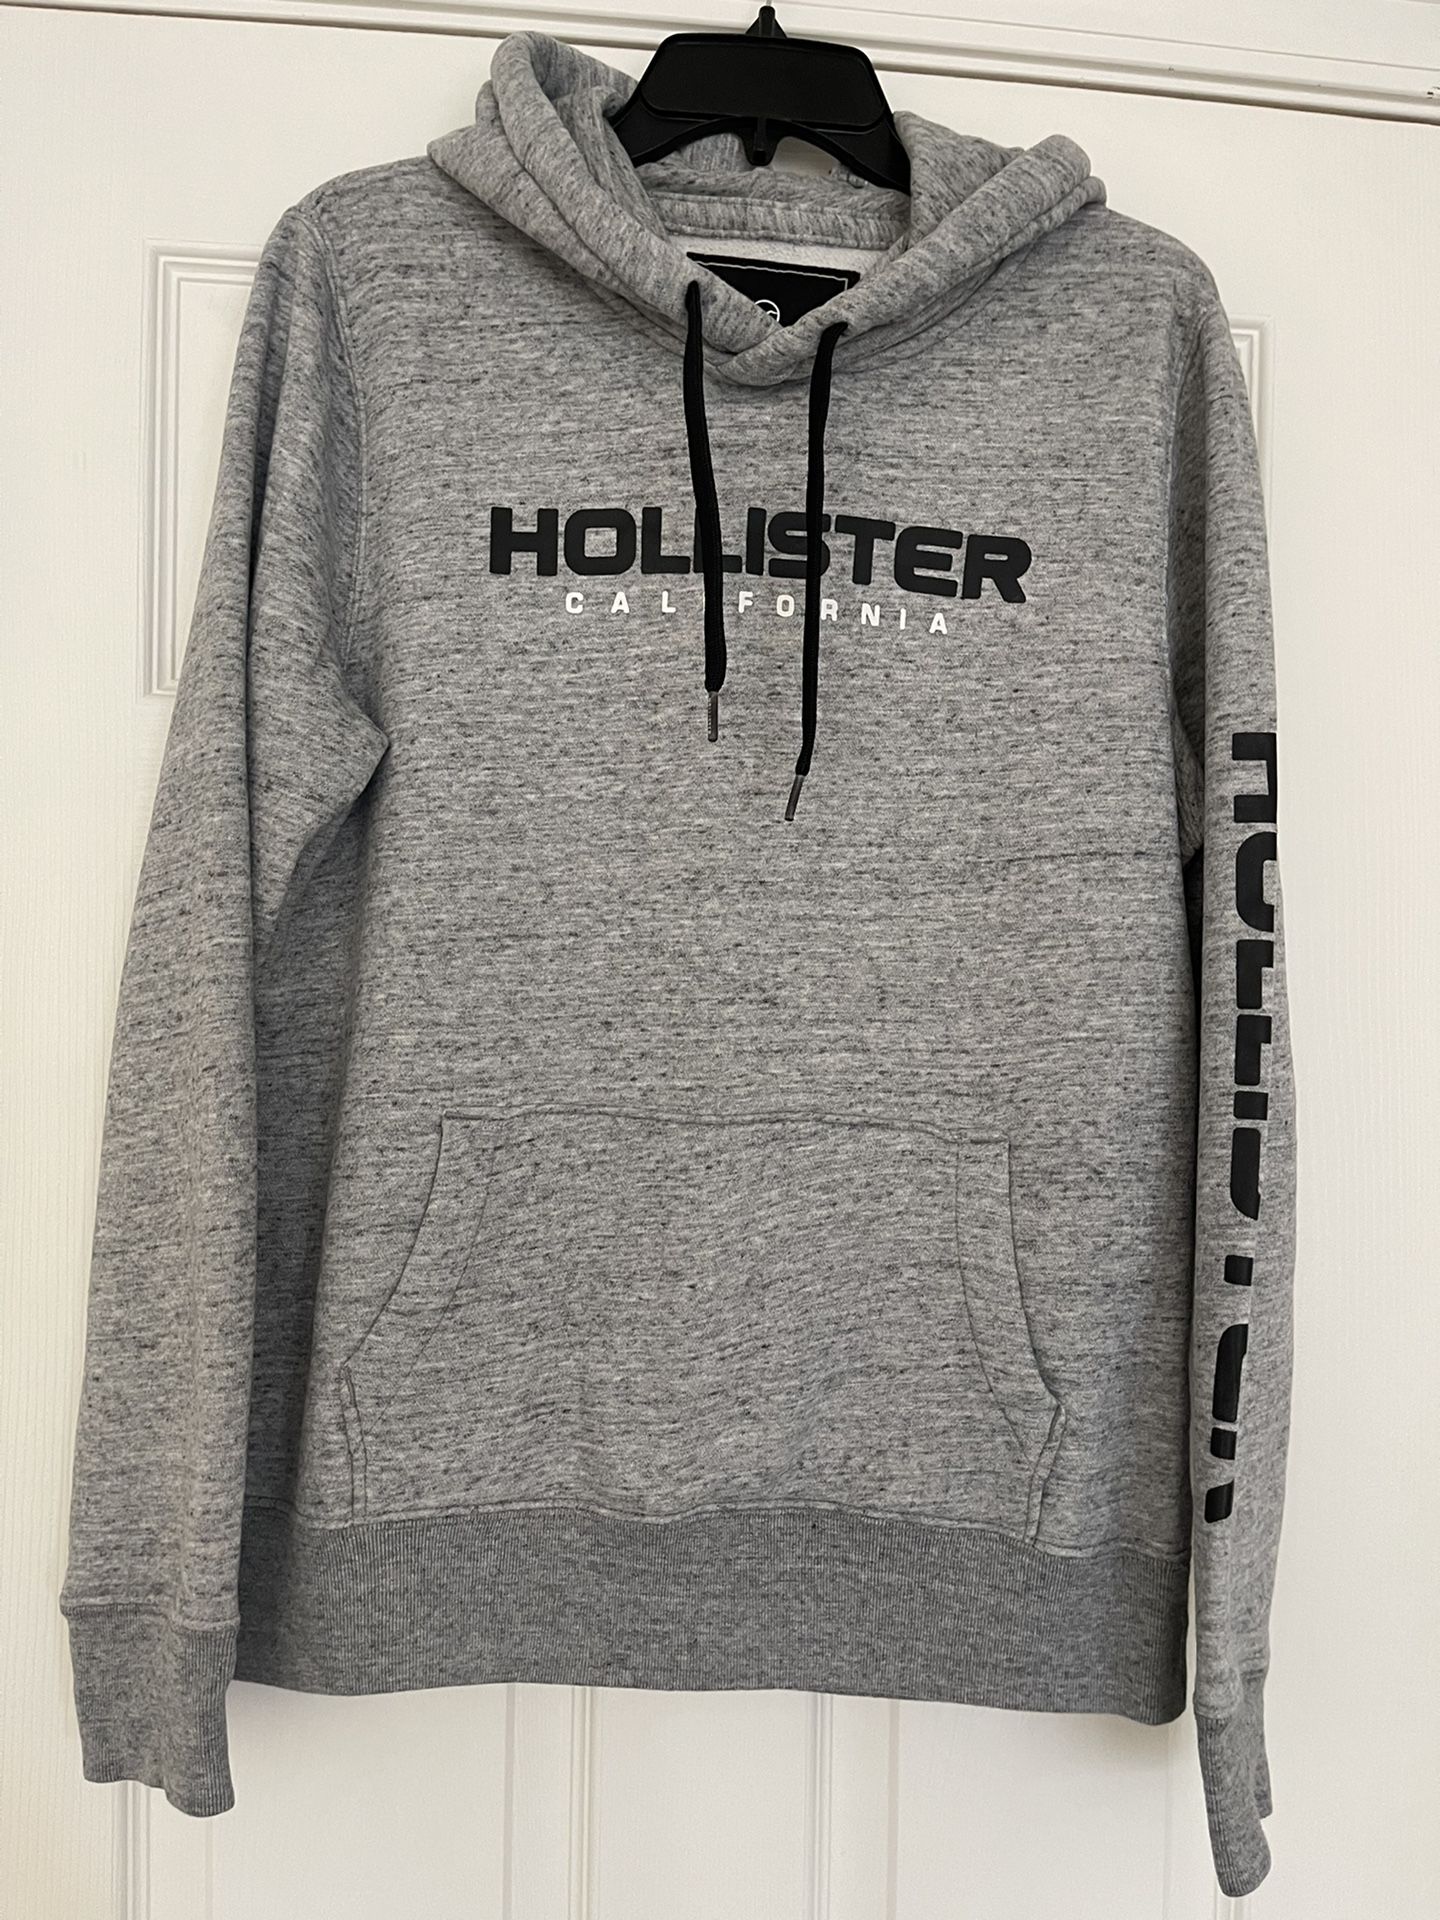 Guys Hollister Hoodie Size M New Condition